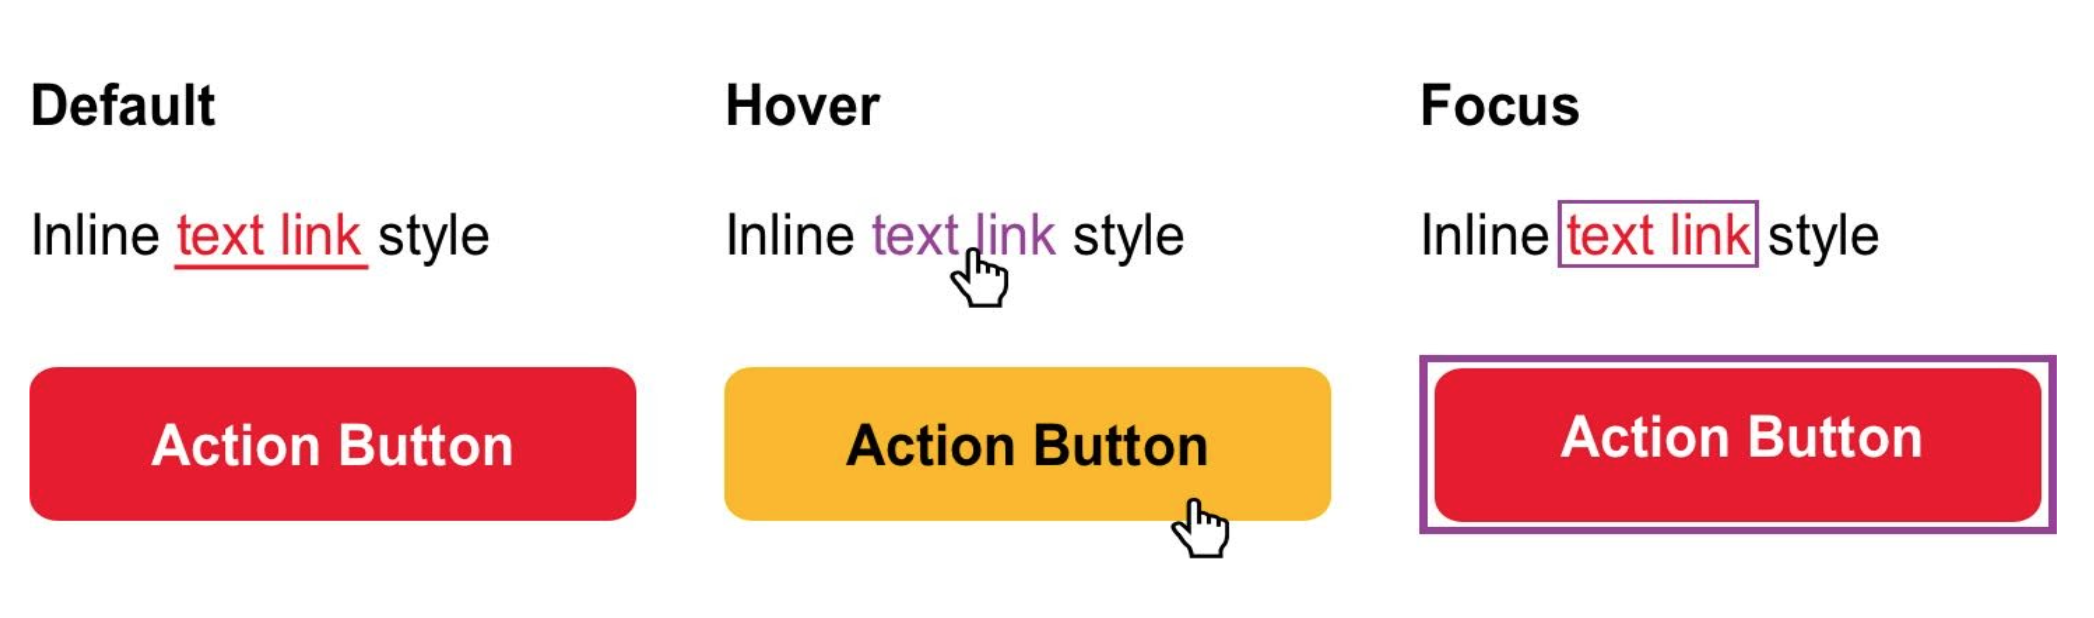 Different states of a hyperlink examples: default, hover and focus.